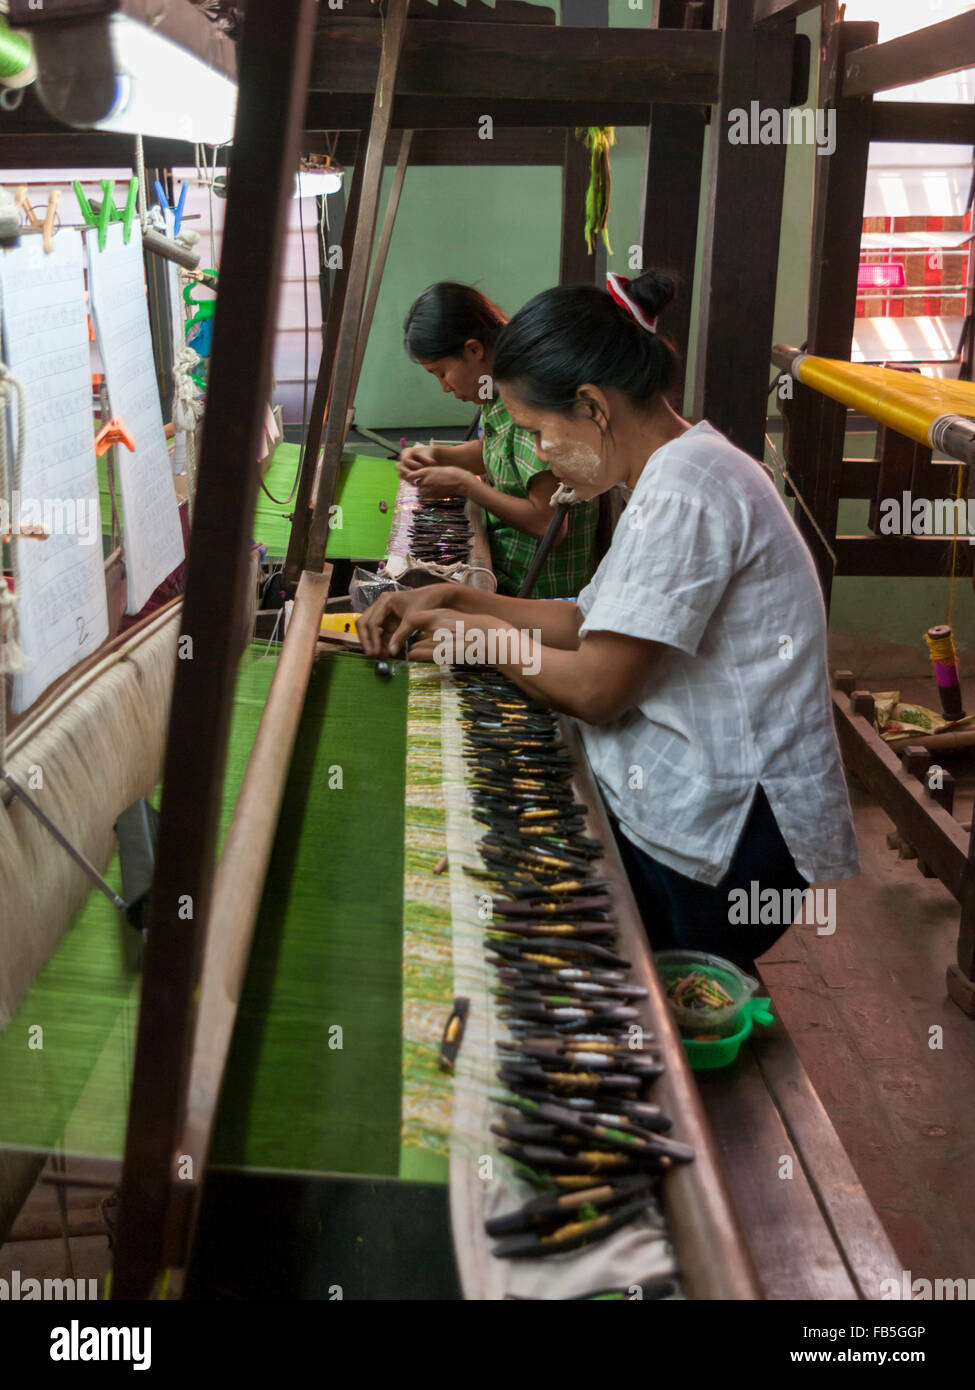 Two women weaving by using shuttles with thread spools on a loom. Partially woven green silk fabric visible. Mandalay, Myanmar. Stock Photo